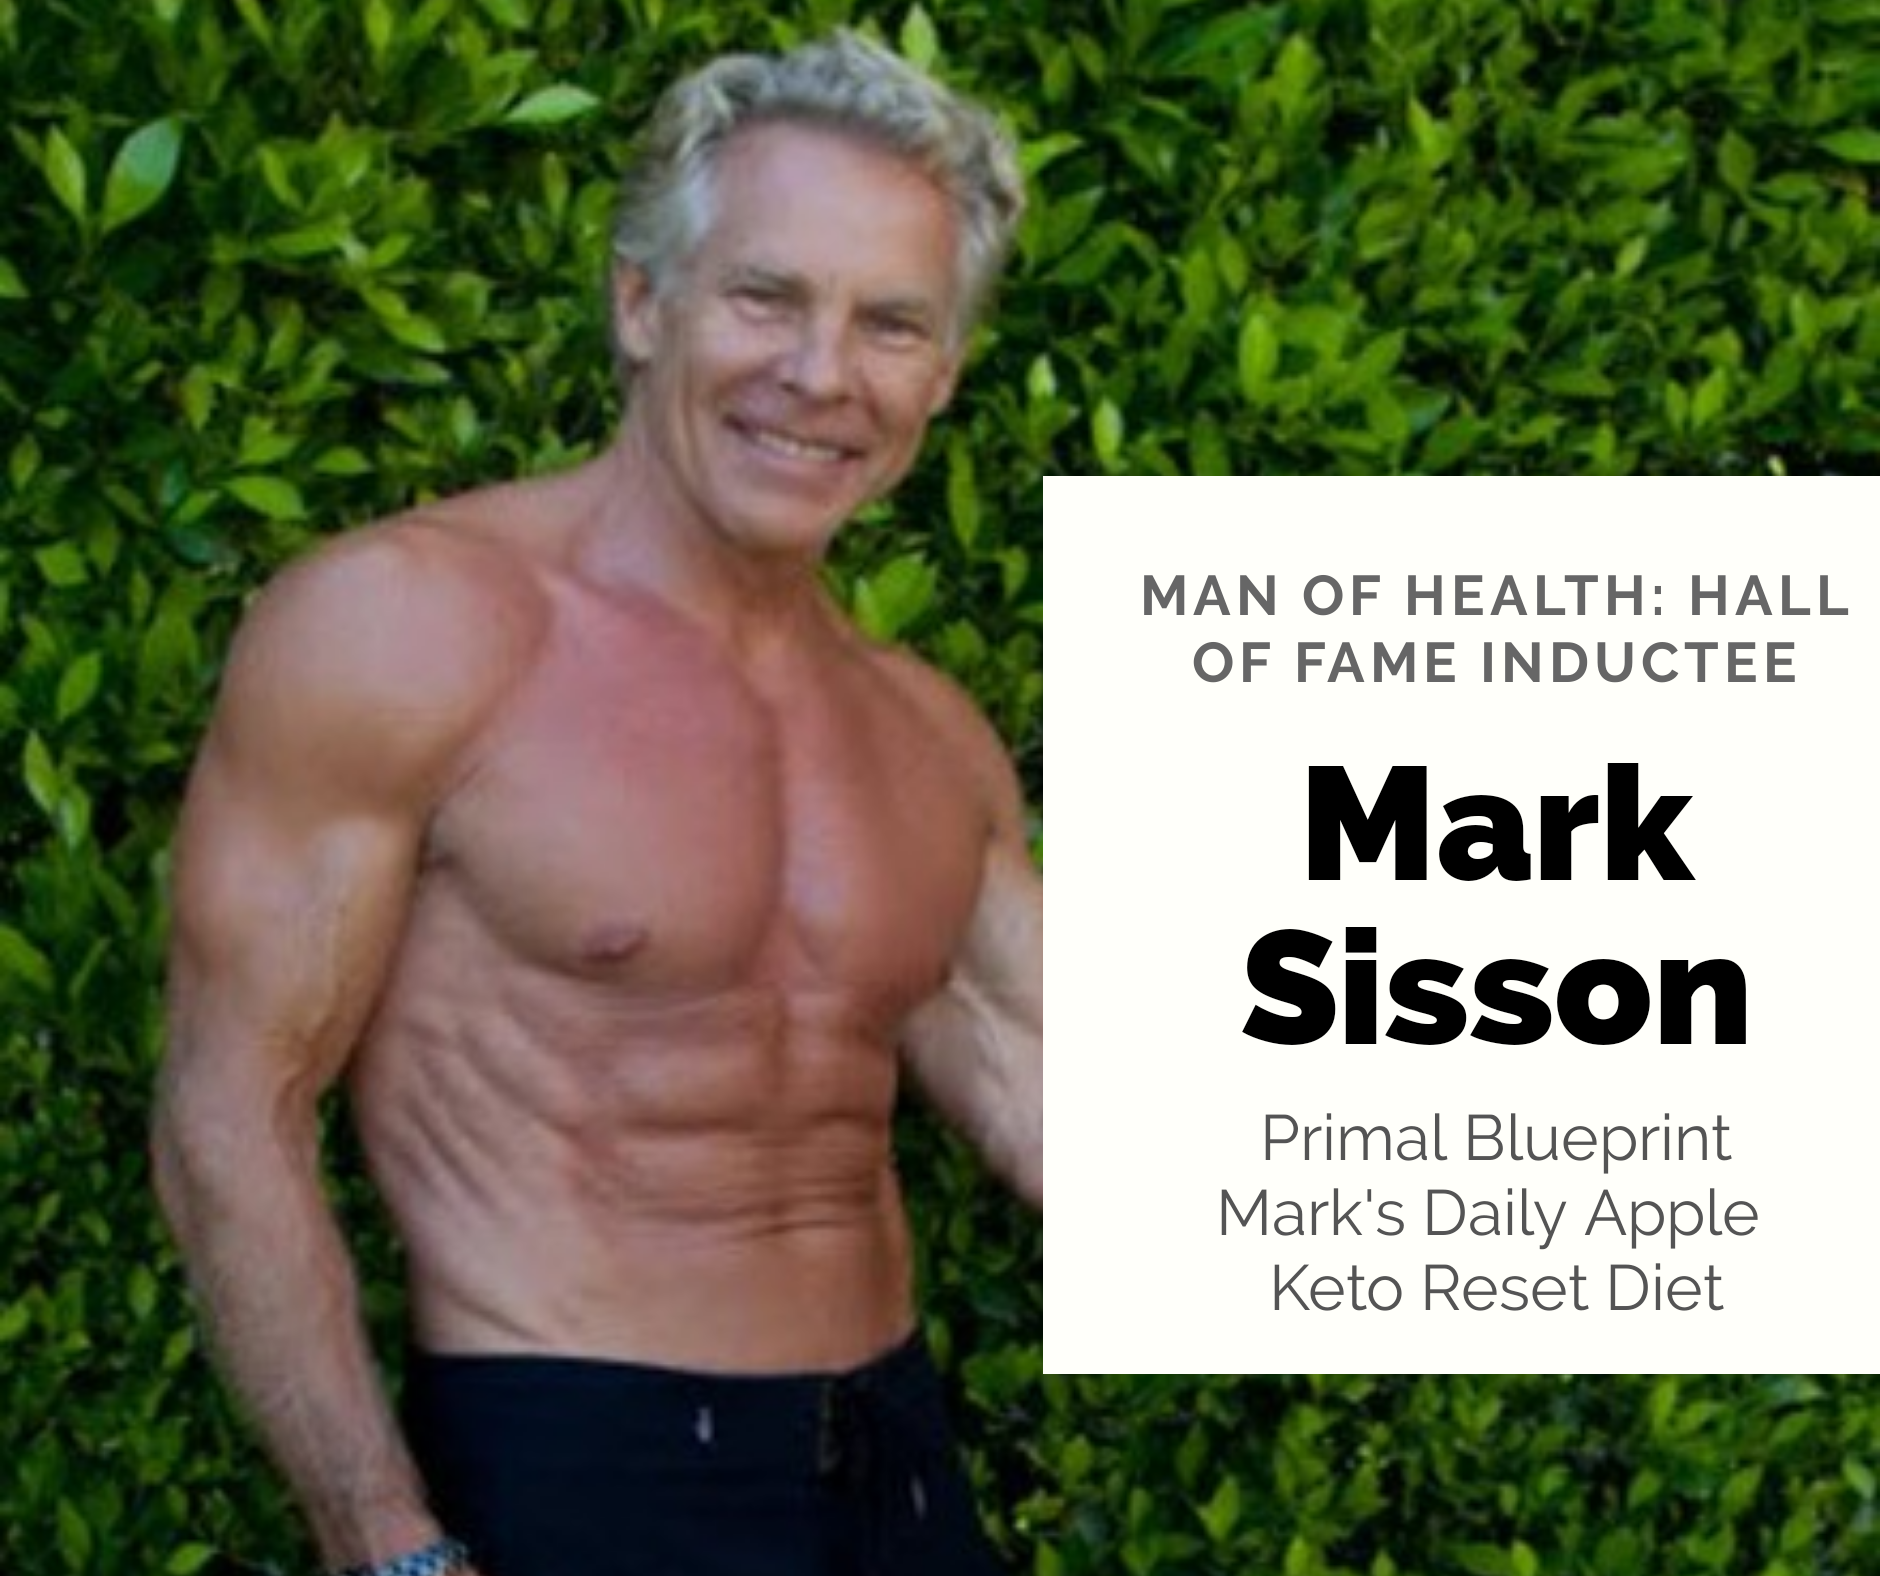 You are currently viewing Man of Health: Hall of Fame Inductee: Mark Sisson